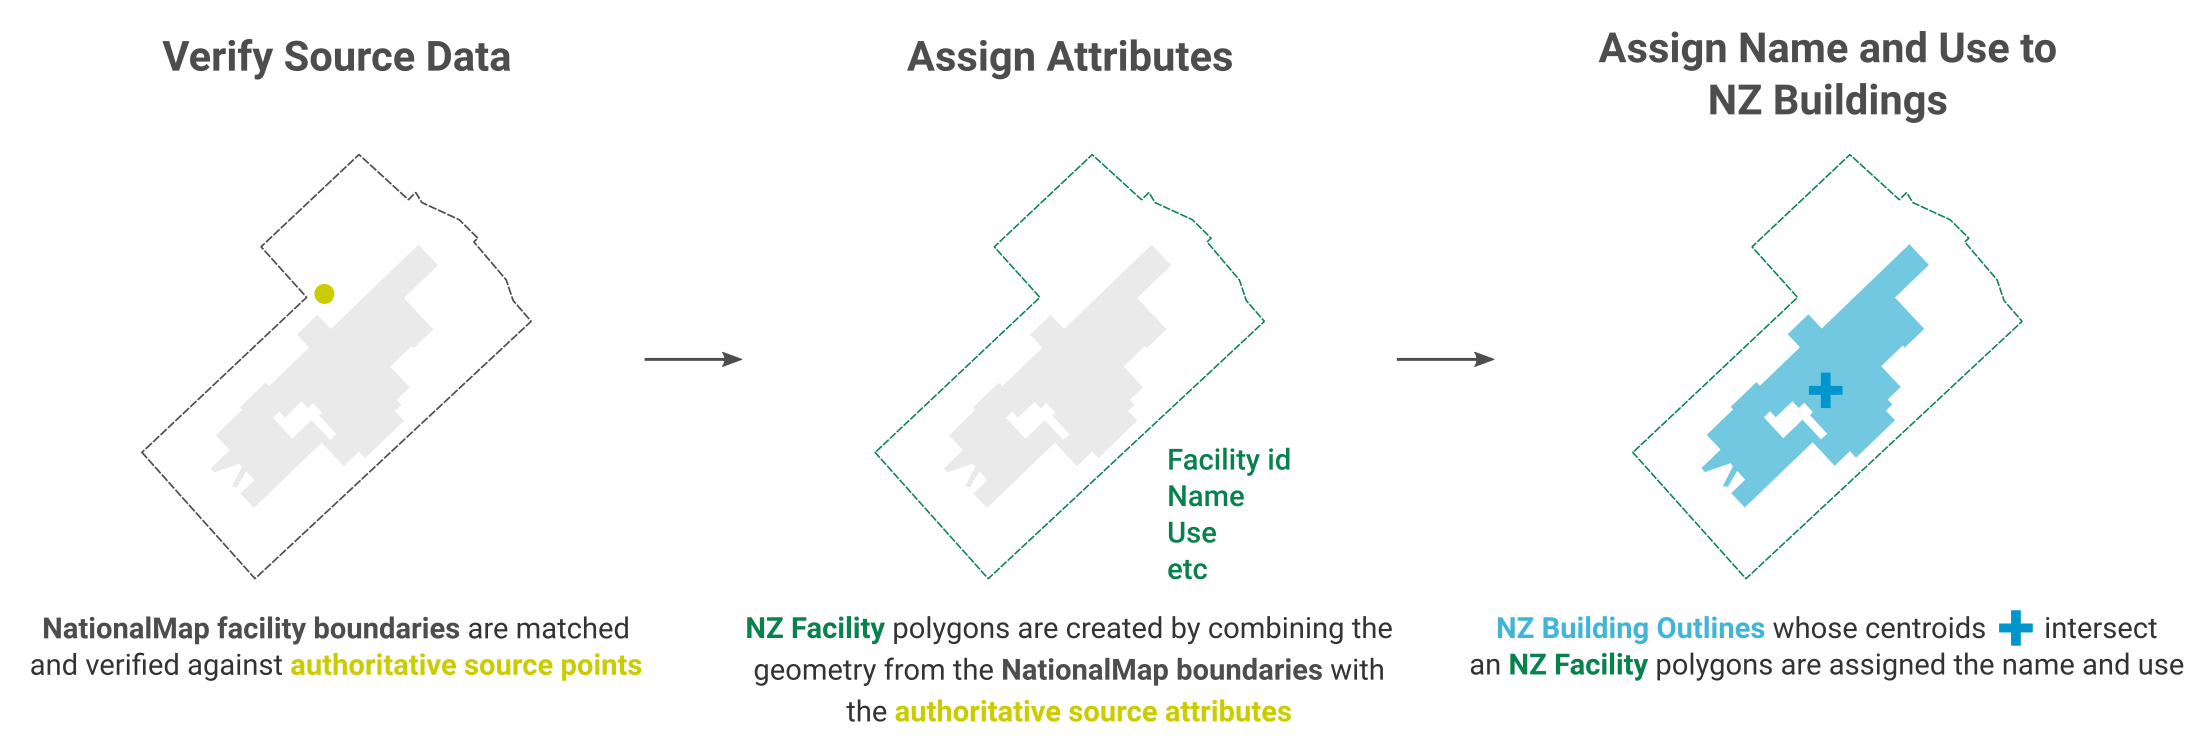 an overview of the NZ Facilities creation process